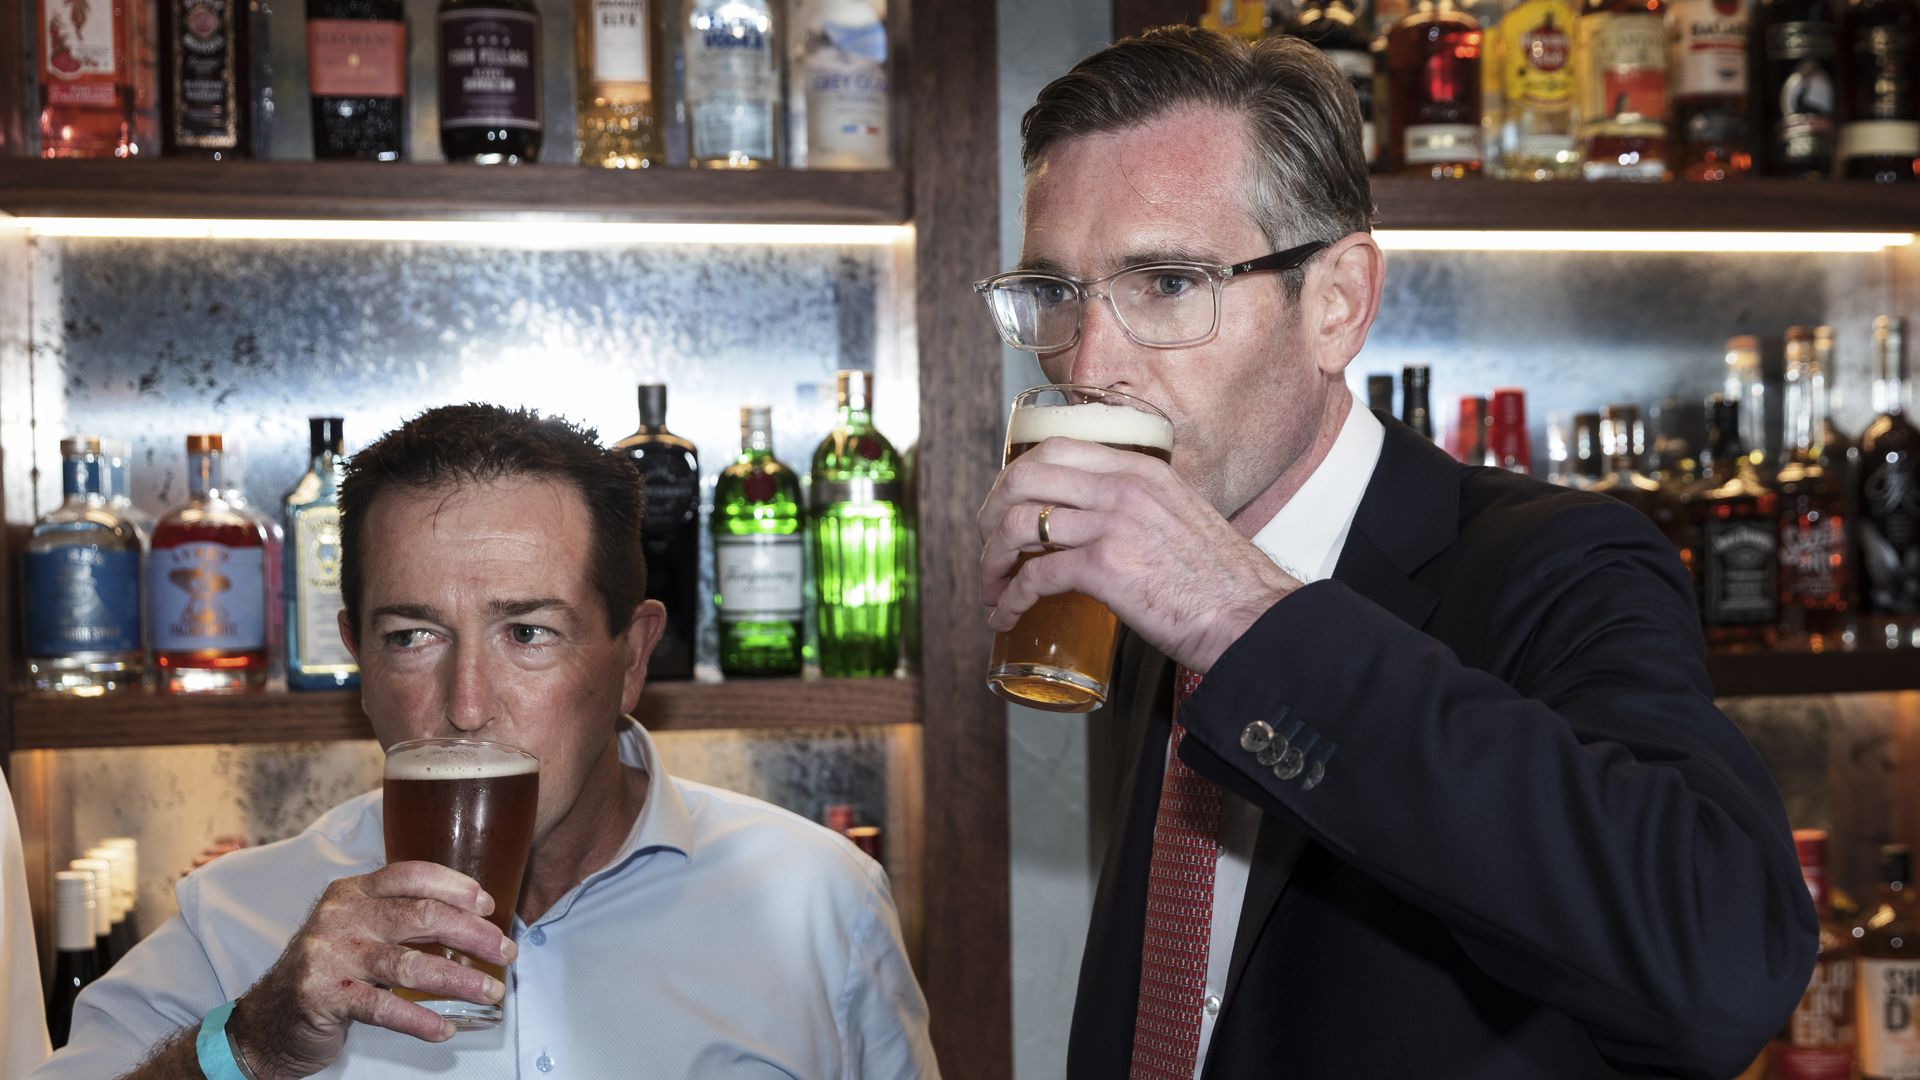  New South Wales Deputy Premier Paul Toole and Premier Dominic Perrottet drink a beer before holding a media conference at Watson’s Pub in Moore Park on October 11, 2021 in Sydney, Australia.